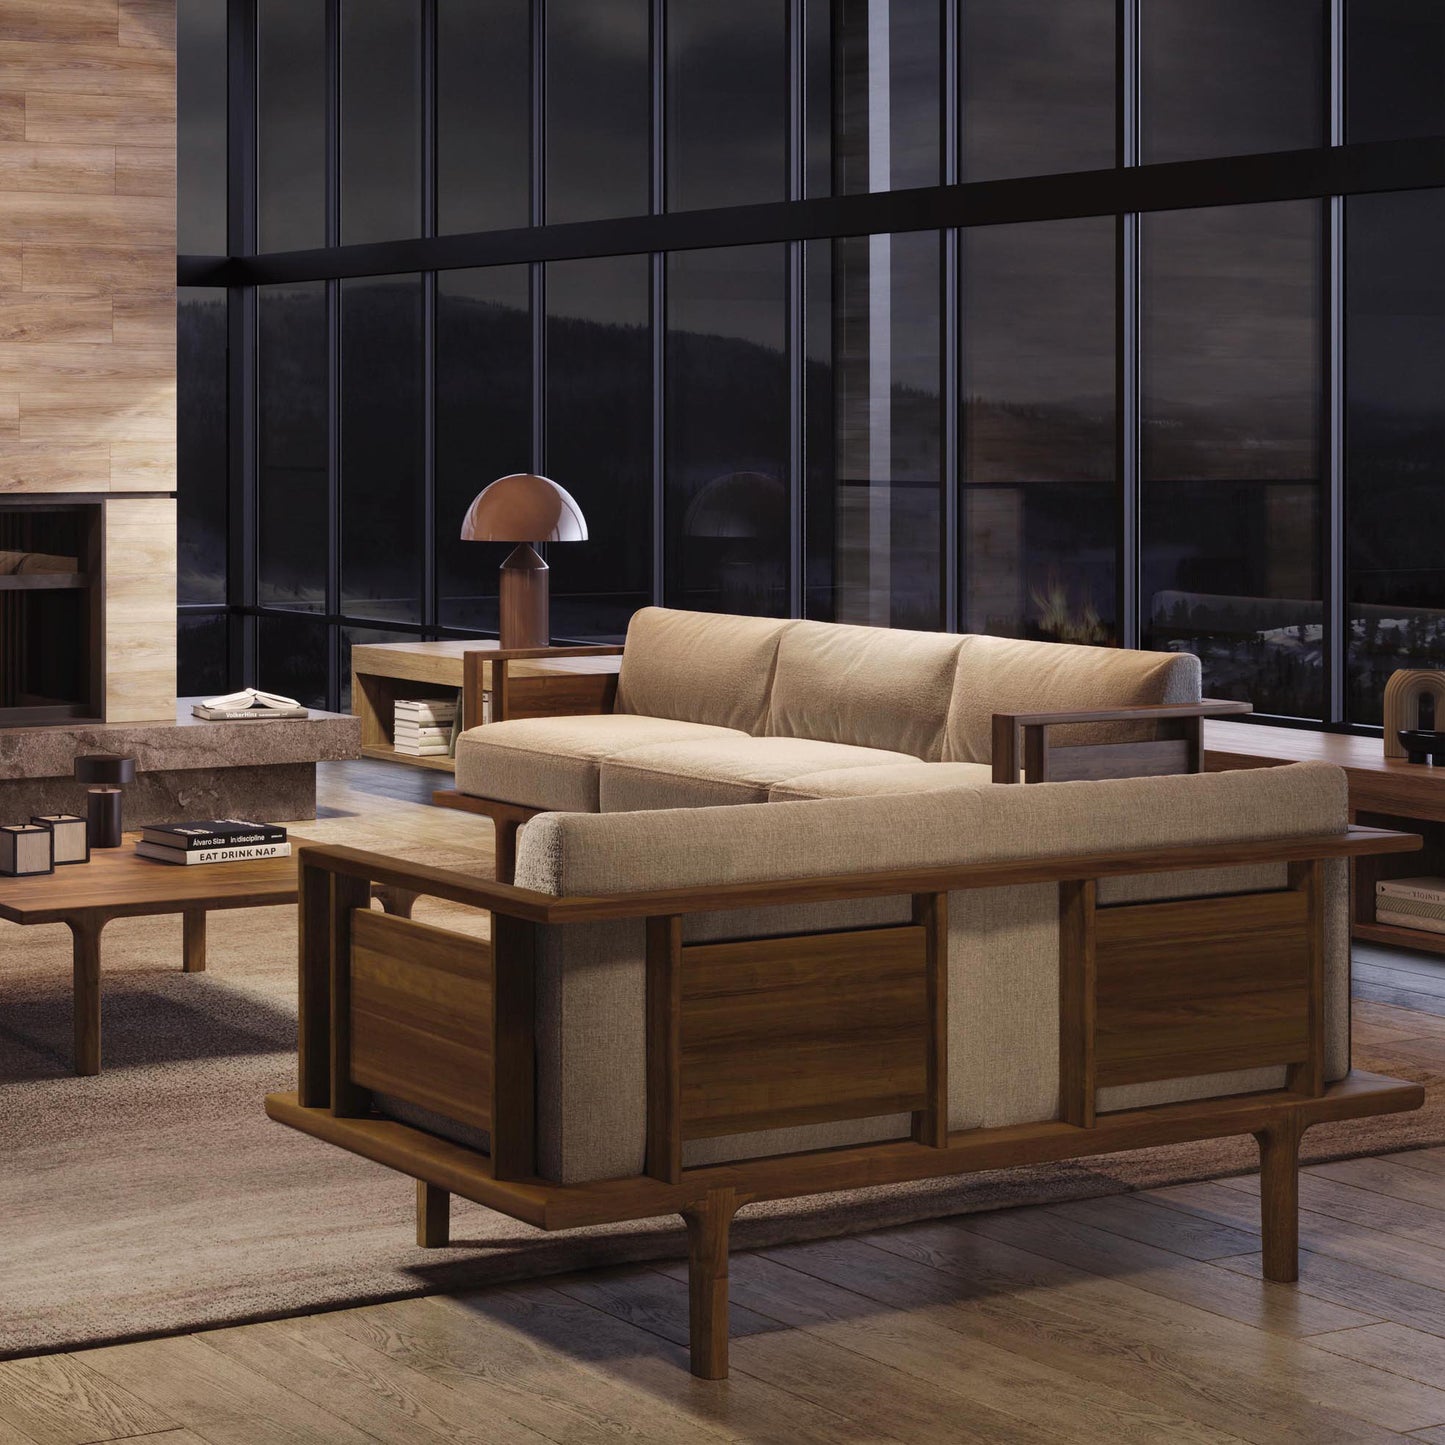 A contemporary living room with wooden furniture, Sierra Walnut Upholstered Sofa from Copeland Furniture, and a fireplace.